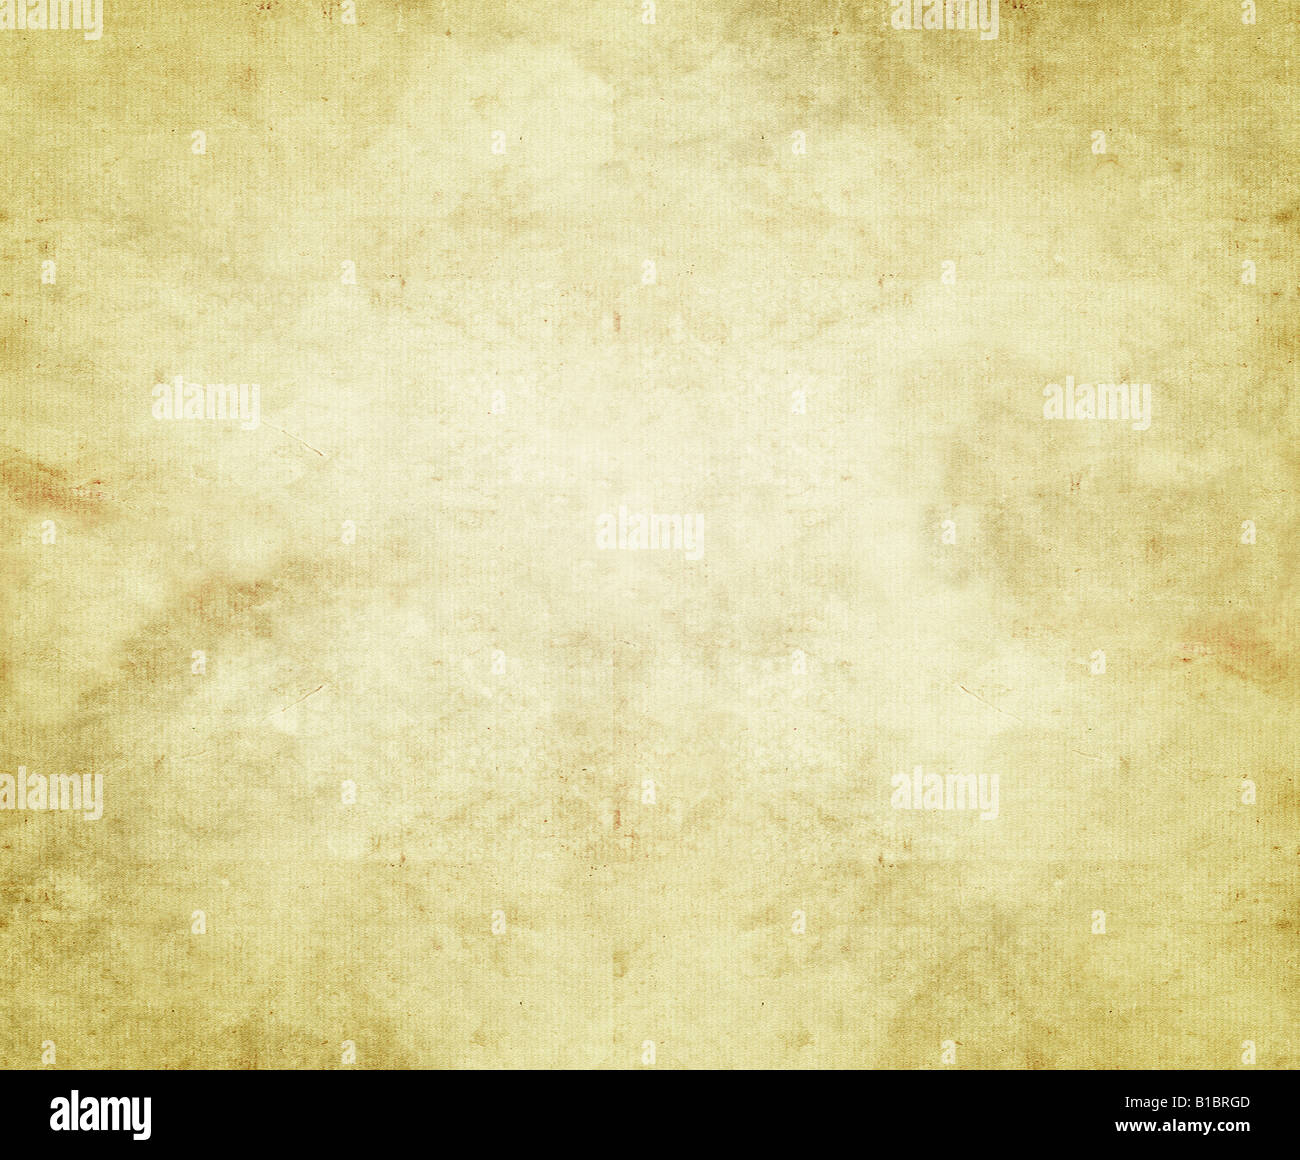 Old parchment paper texture. Background wallpaper Stock Photo - Alamy